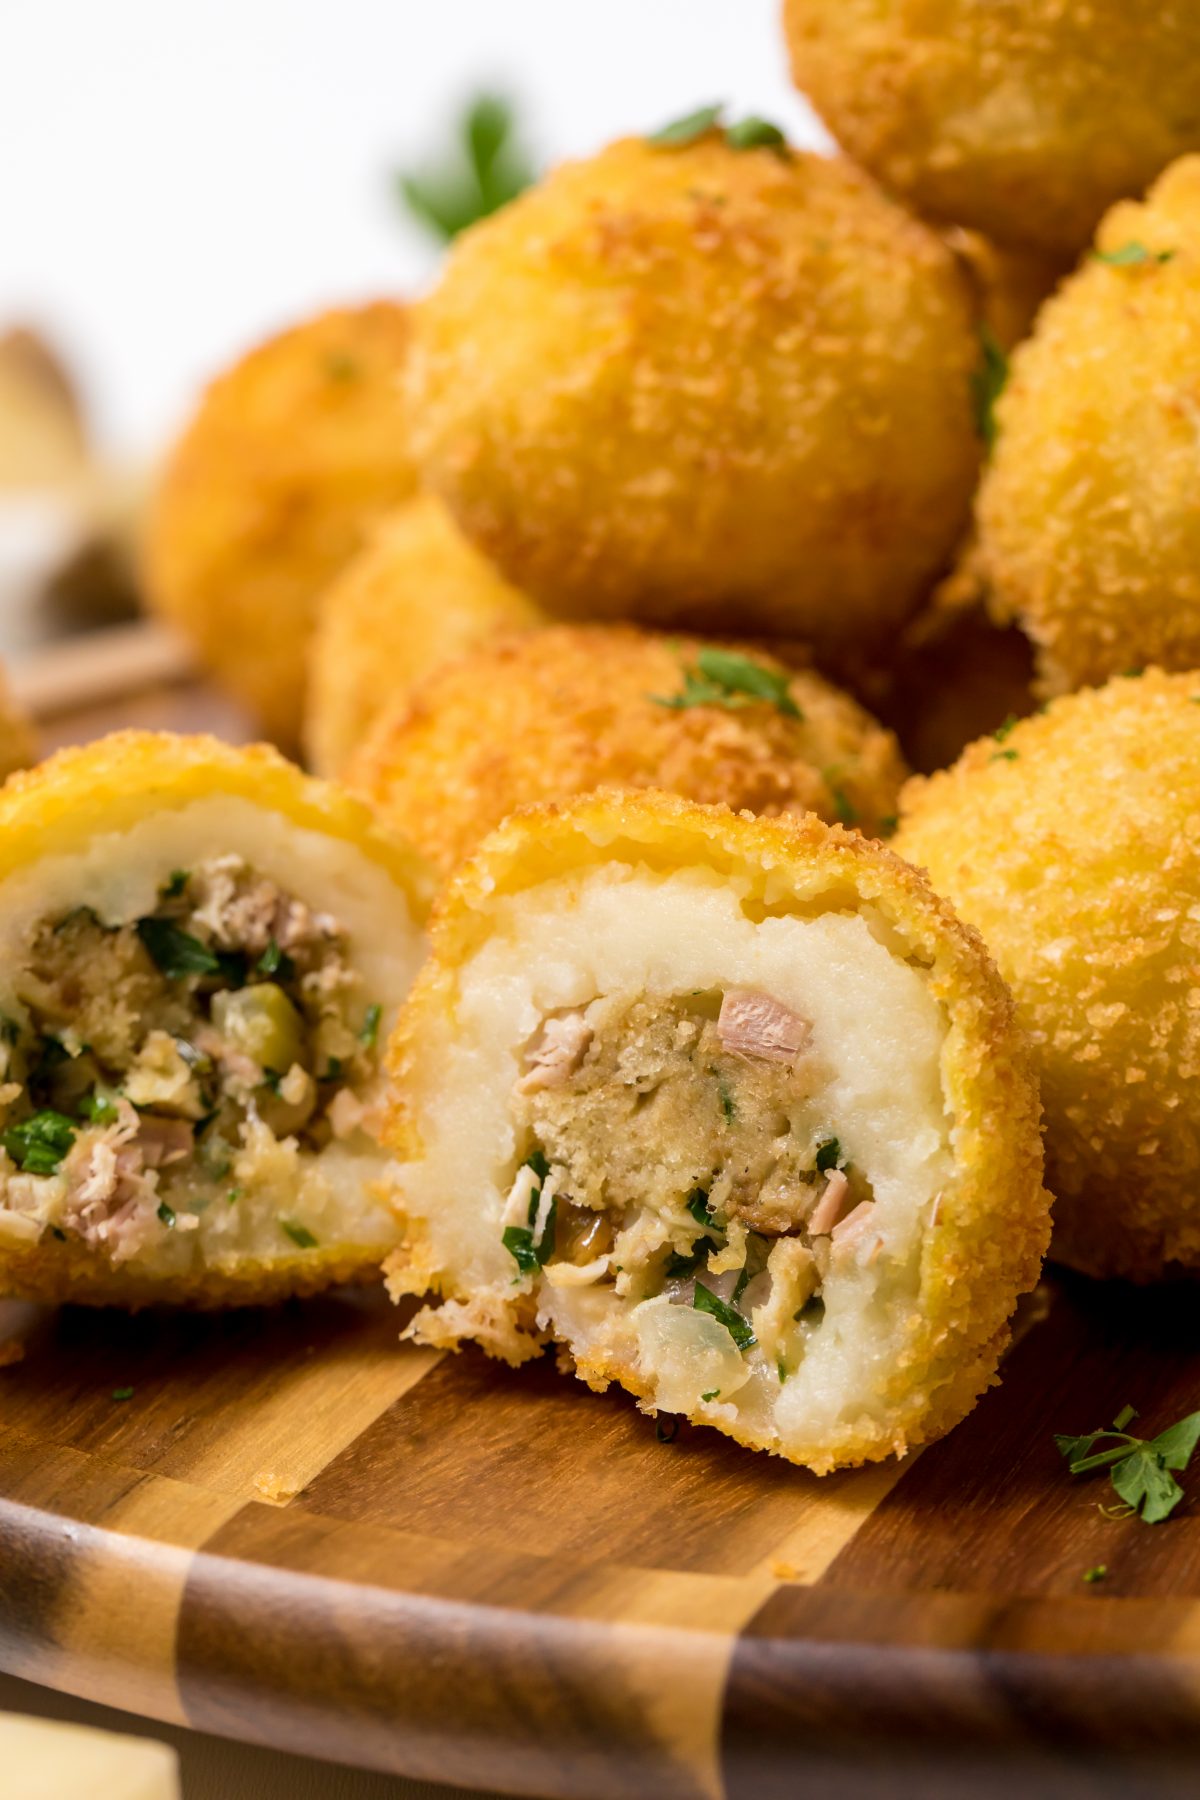 A comfort meal all wrapped up in a ball of fried-potato goodness!